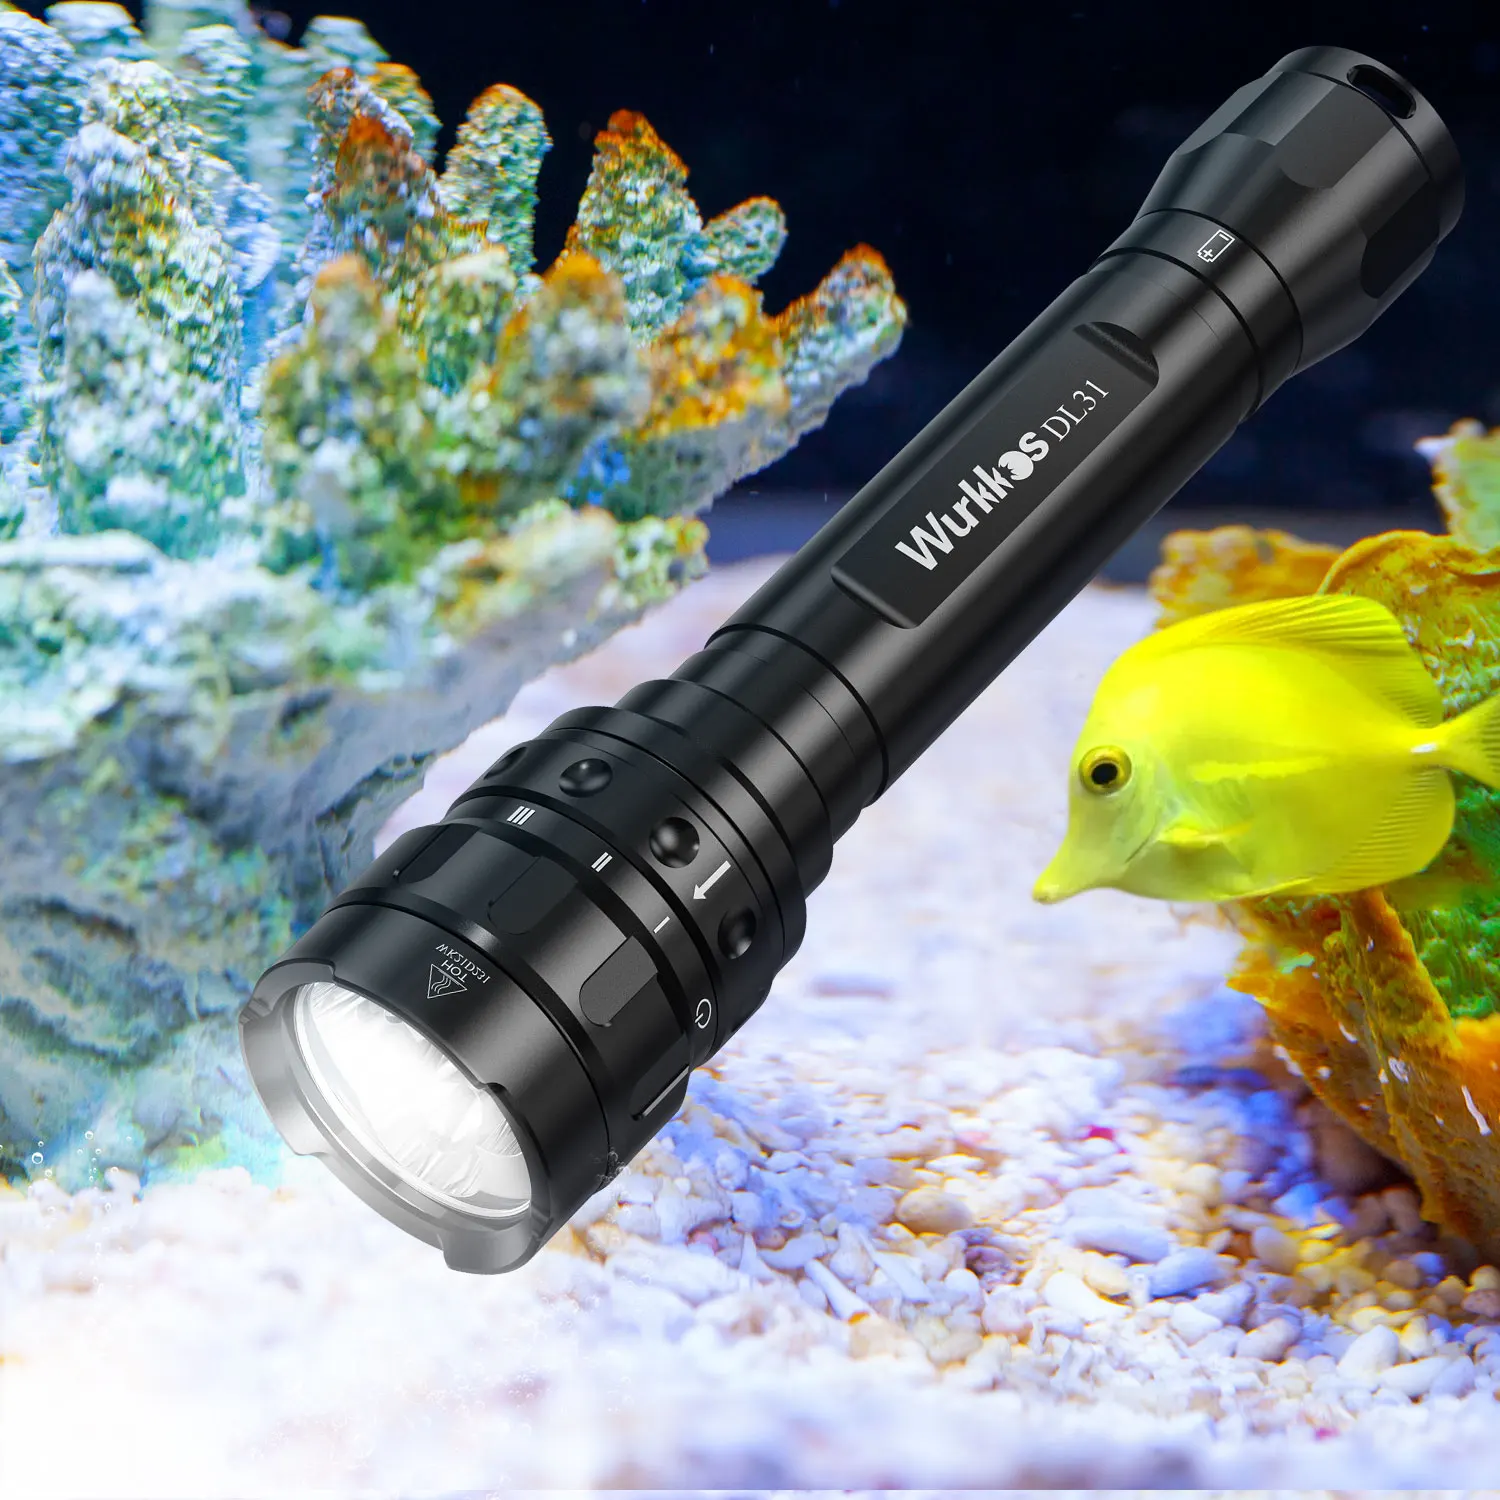 

Wurkkos DL31 Diving Flashlight 3800 LM IPX8 Waterproof Underwater Dive 3* Cree XPL2 LED 5300-5700K with magnetic control ring